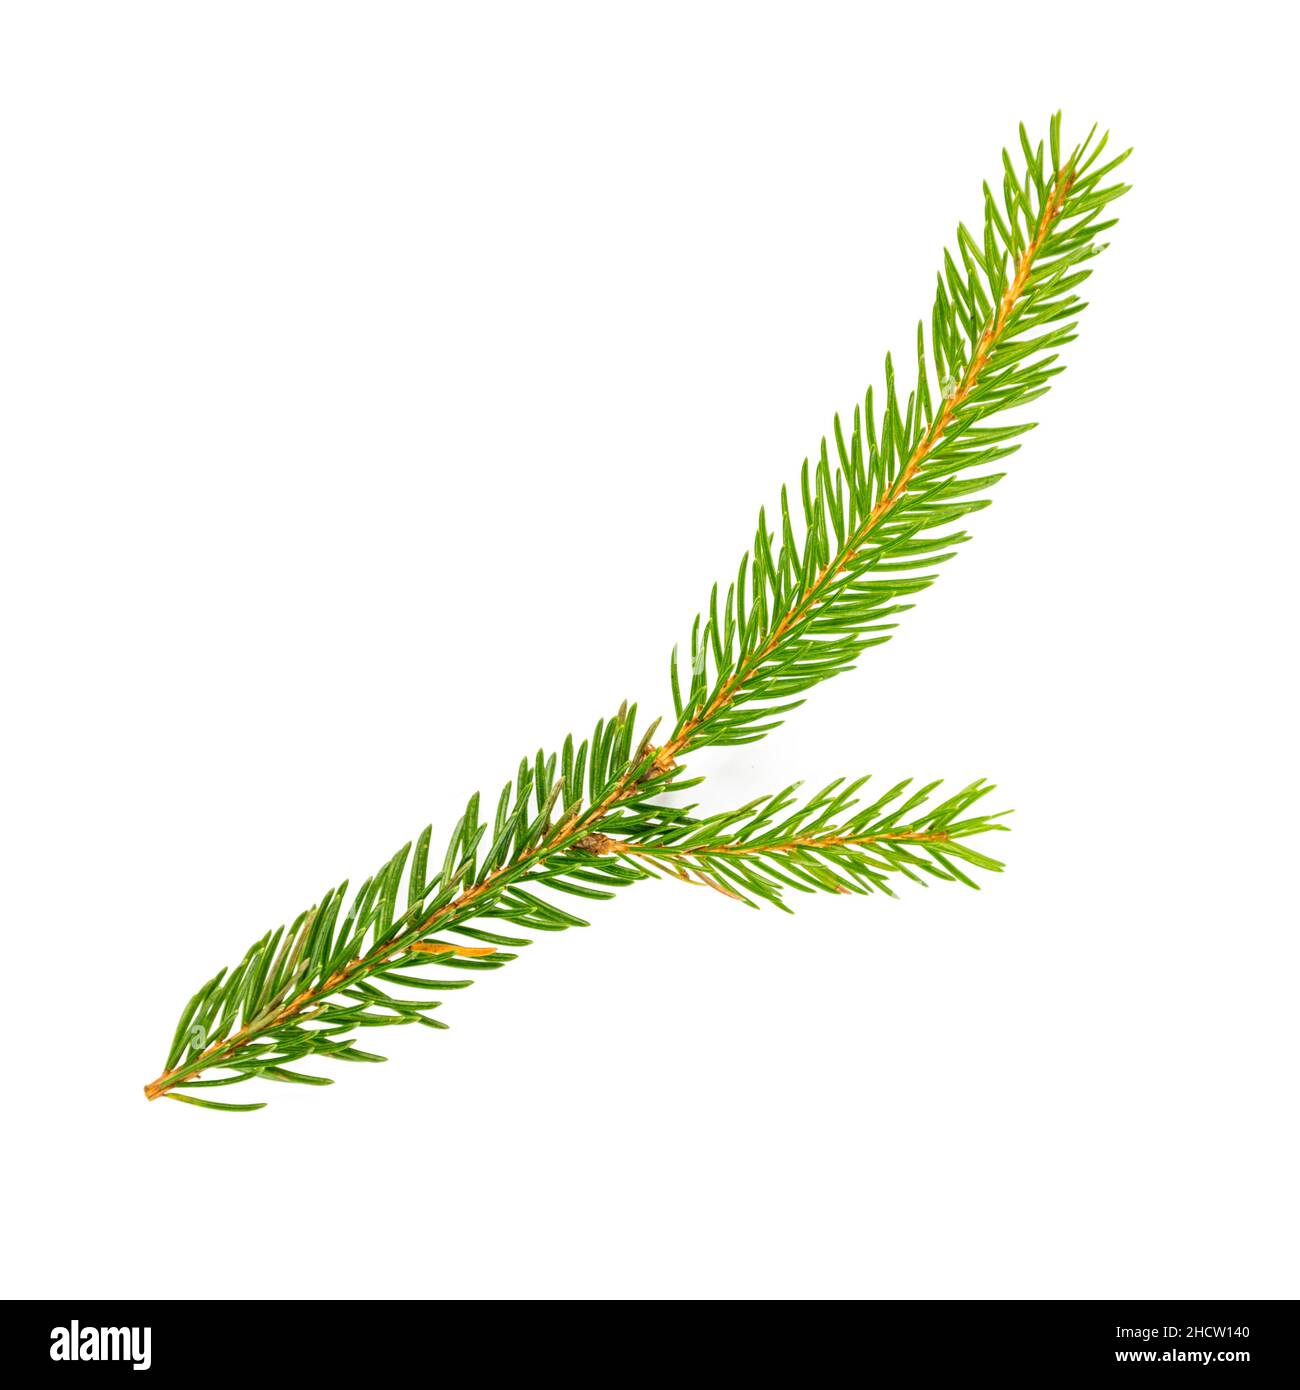 spruce fir branch isolated on white background Stock Photo